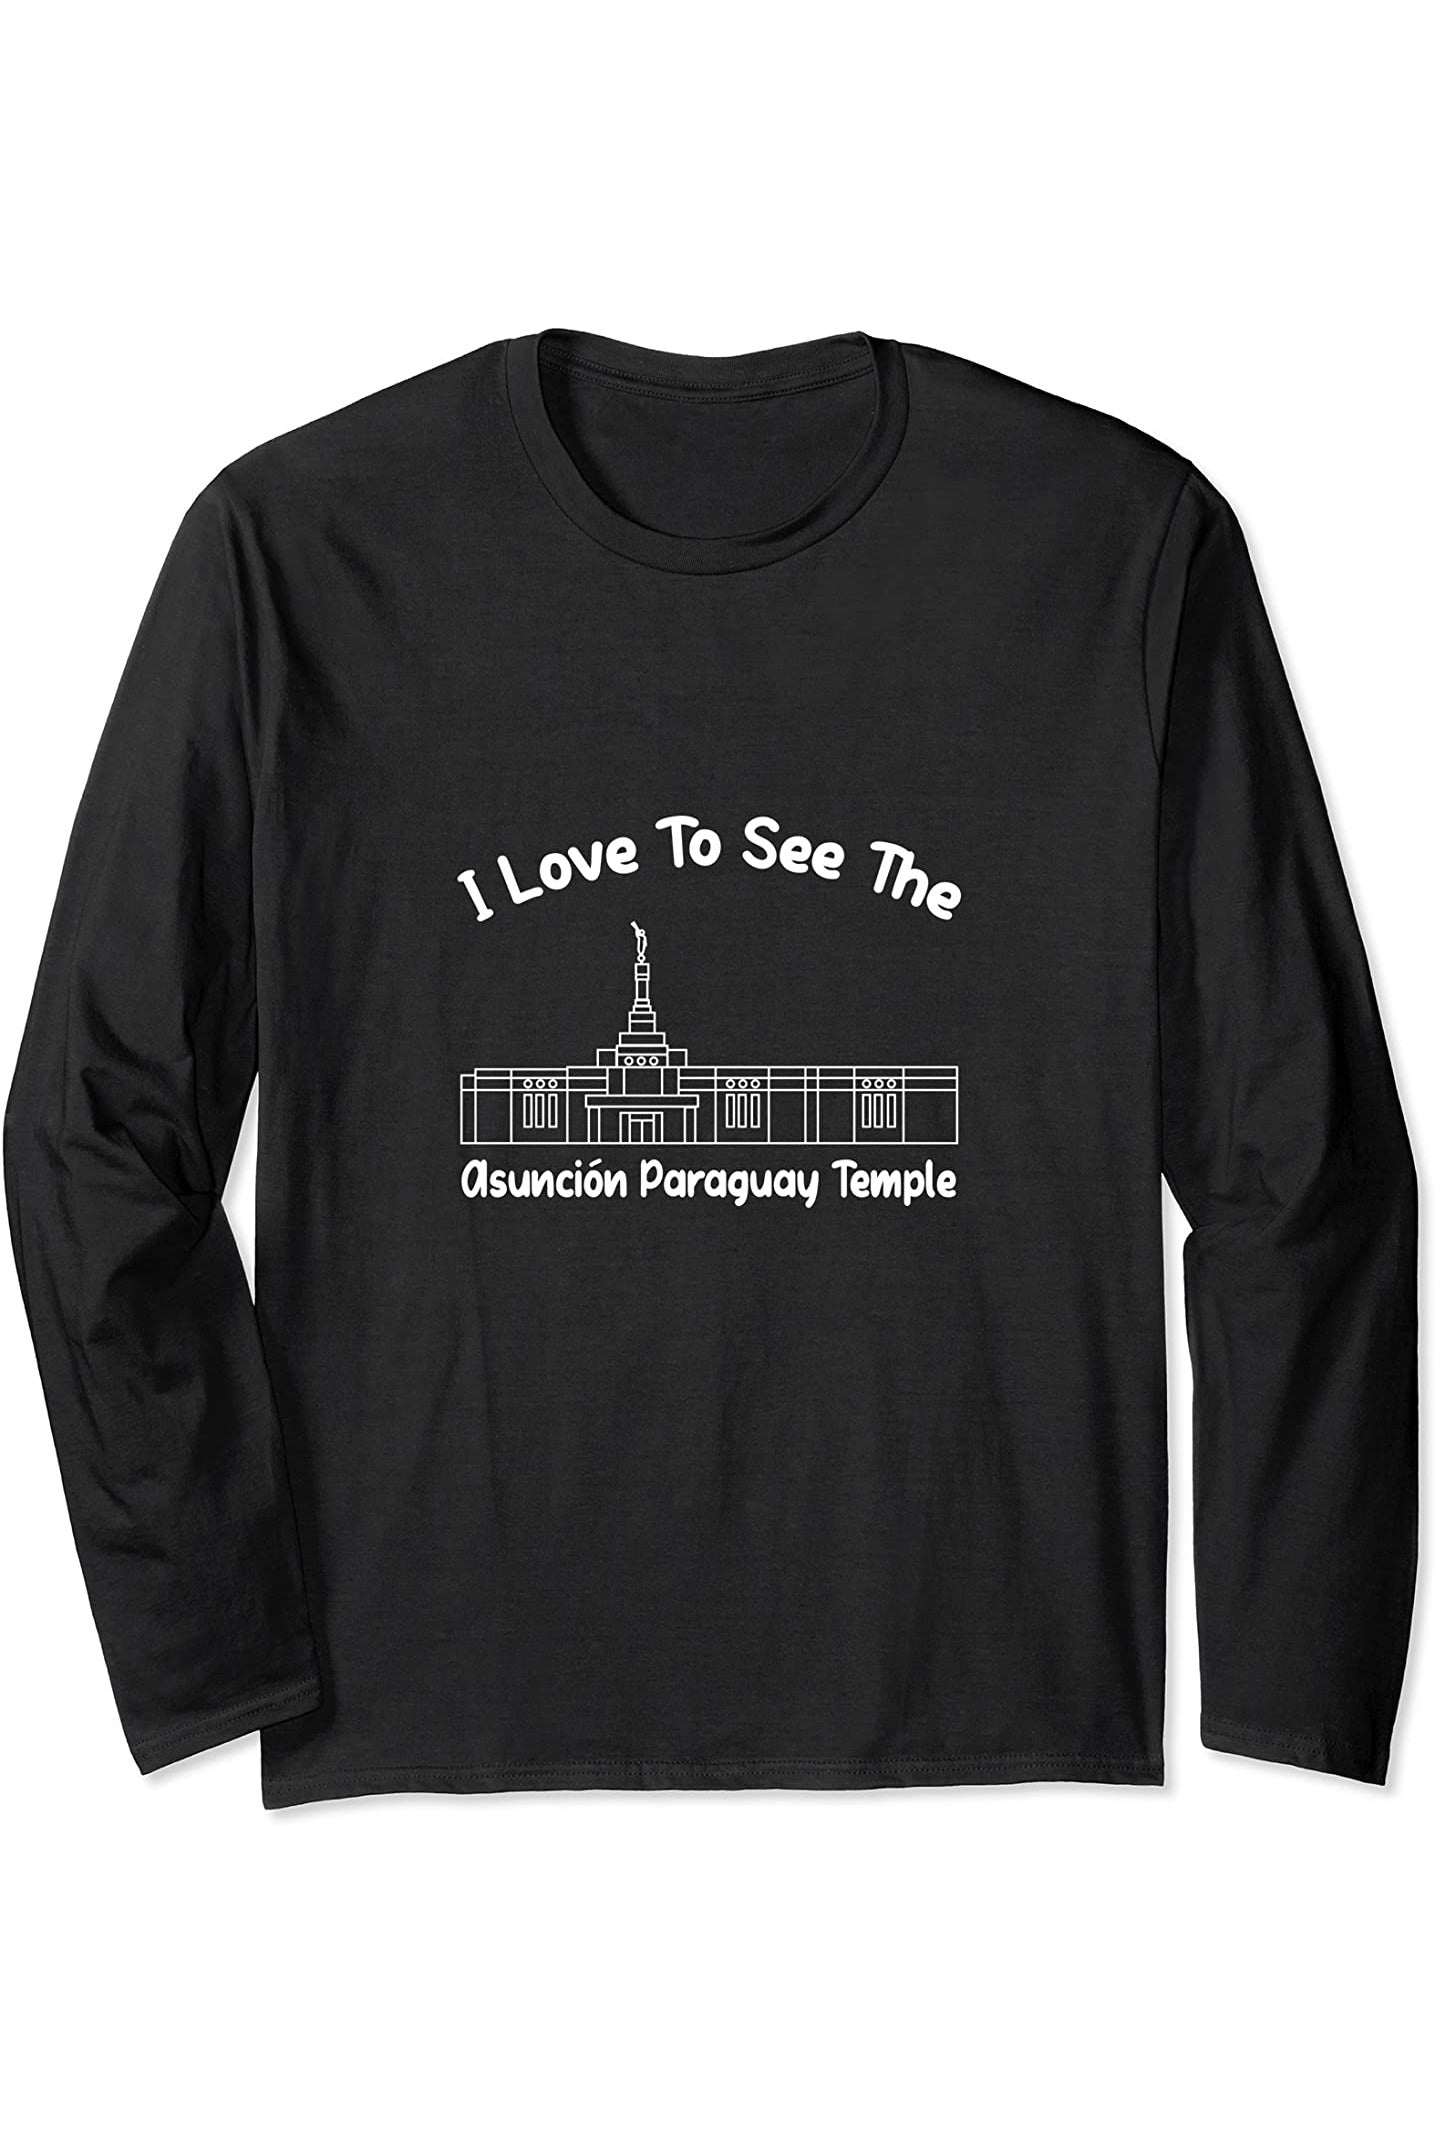 Asuncion Paraguay Temple Long Sleeve T-Shirt - Primary Style (English) US